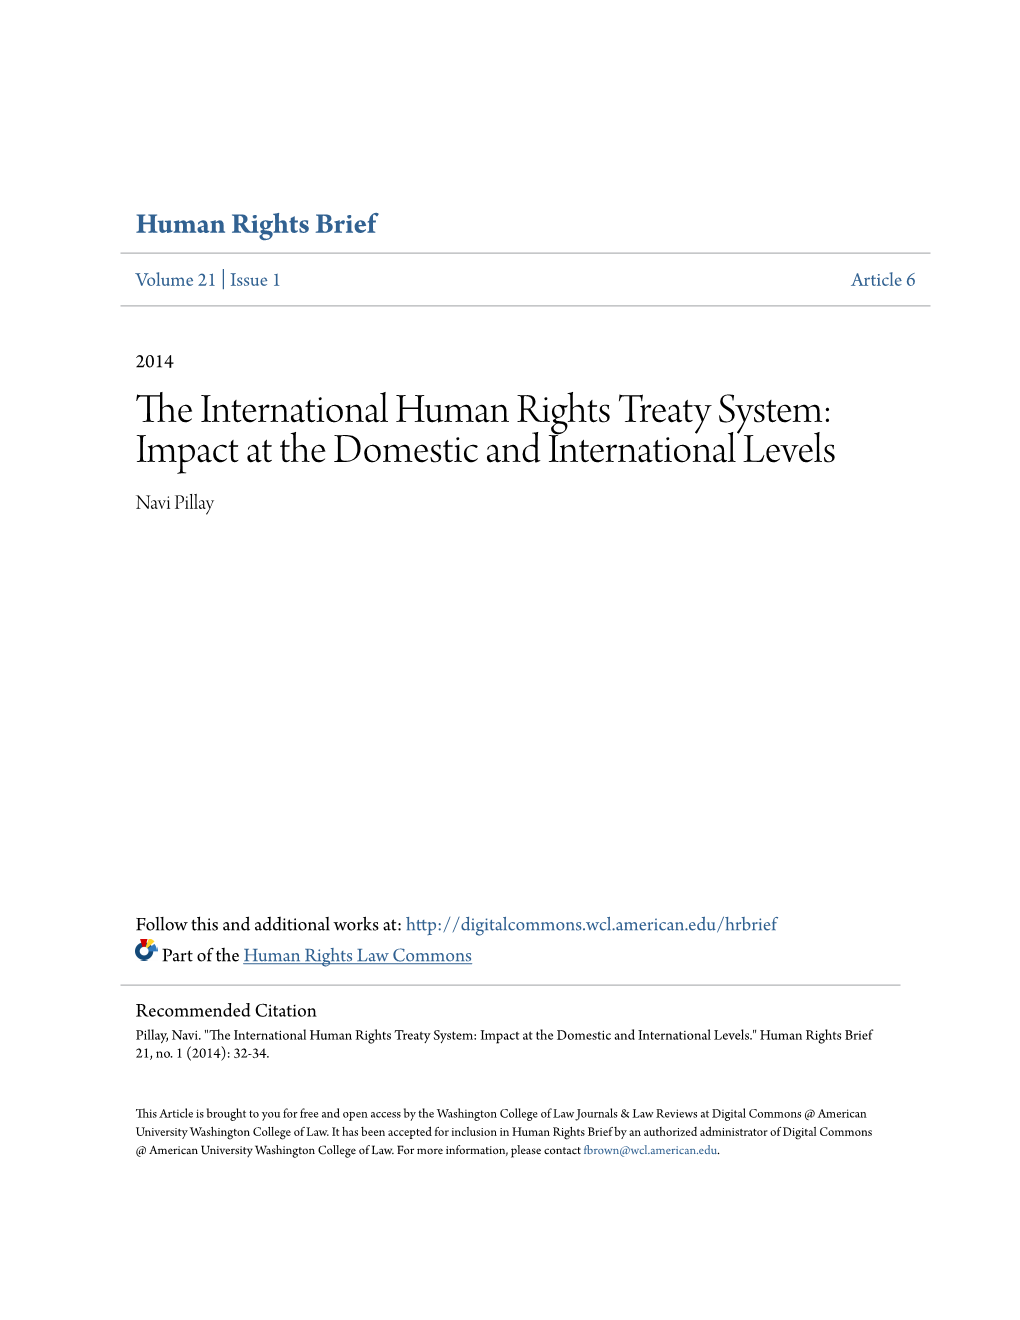 The International Human Rights Treaty System: Impact at the Domes